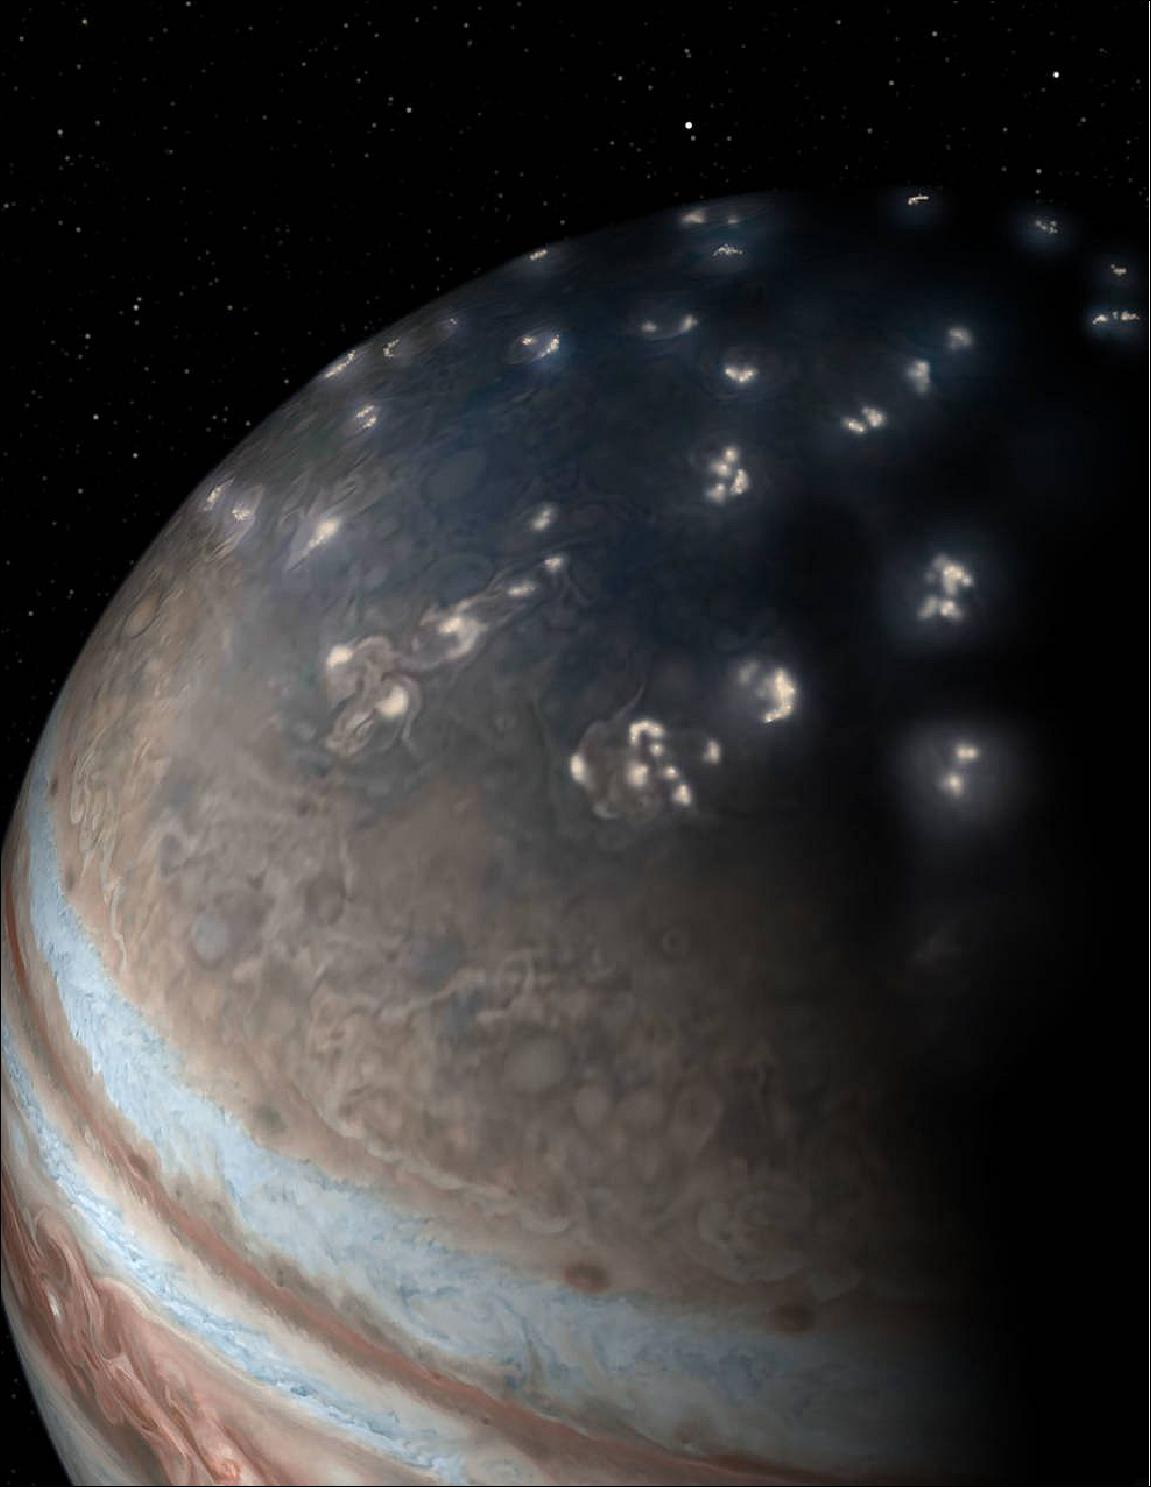 Figure 42: This artist's concept of lightning distribution in Jupiter's northern hemisphere incorporates a JunoCam image with artistic embellishments. Data from NASA's Juno mission indicates that most of the lightning activity on Jupiter is near its poles (image credits: NASA/JPL-Caltech/SwRI/JunoCam)